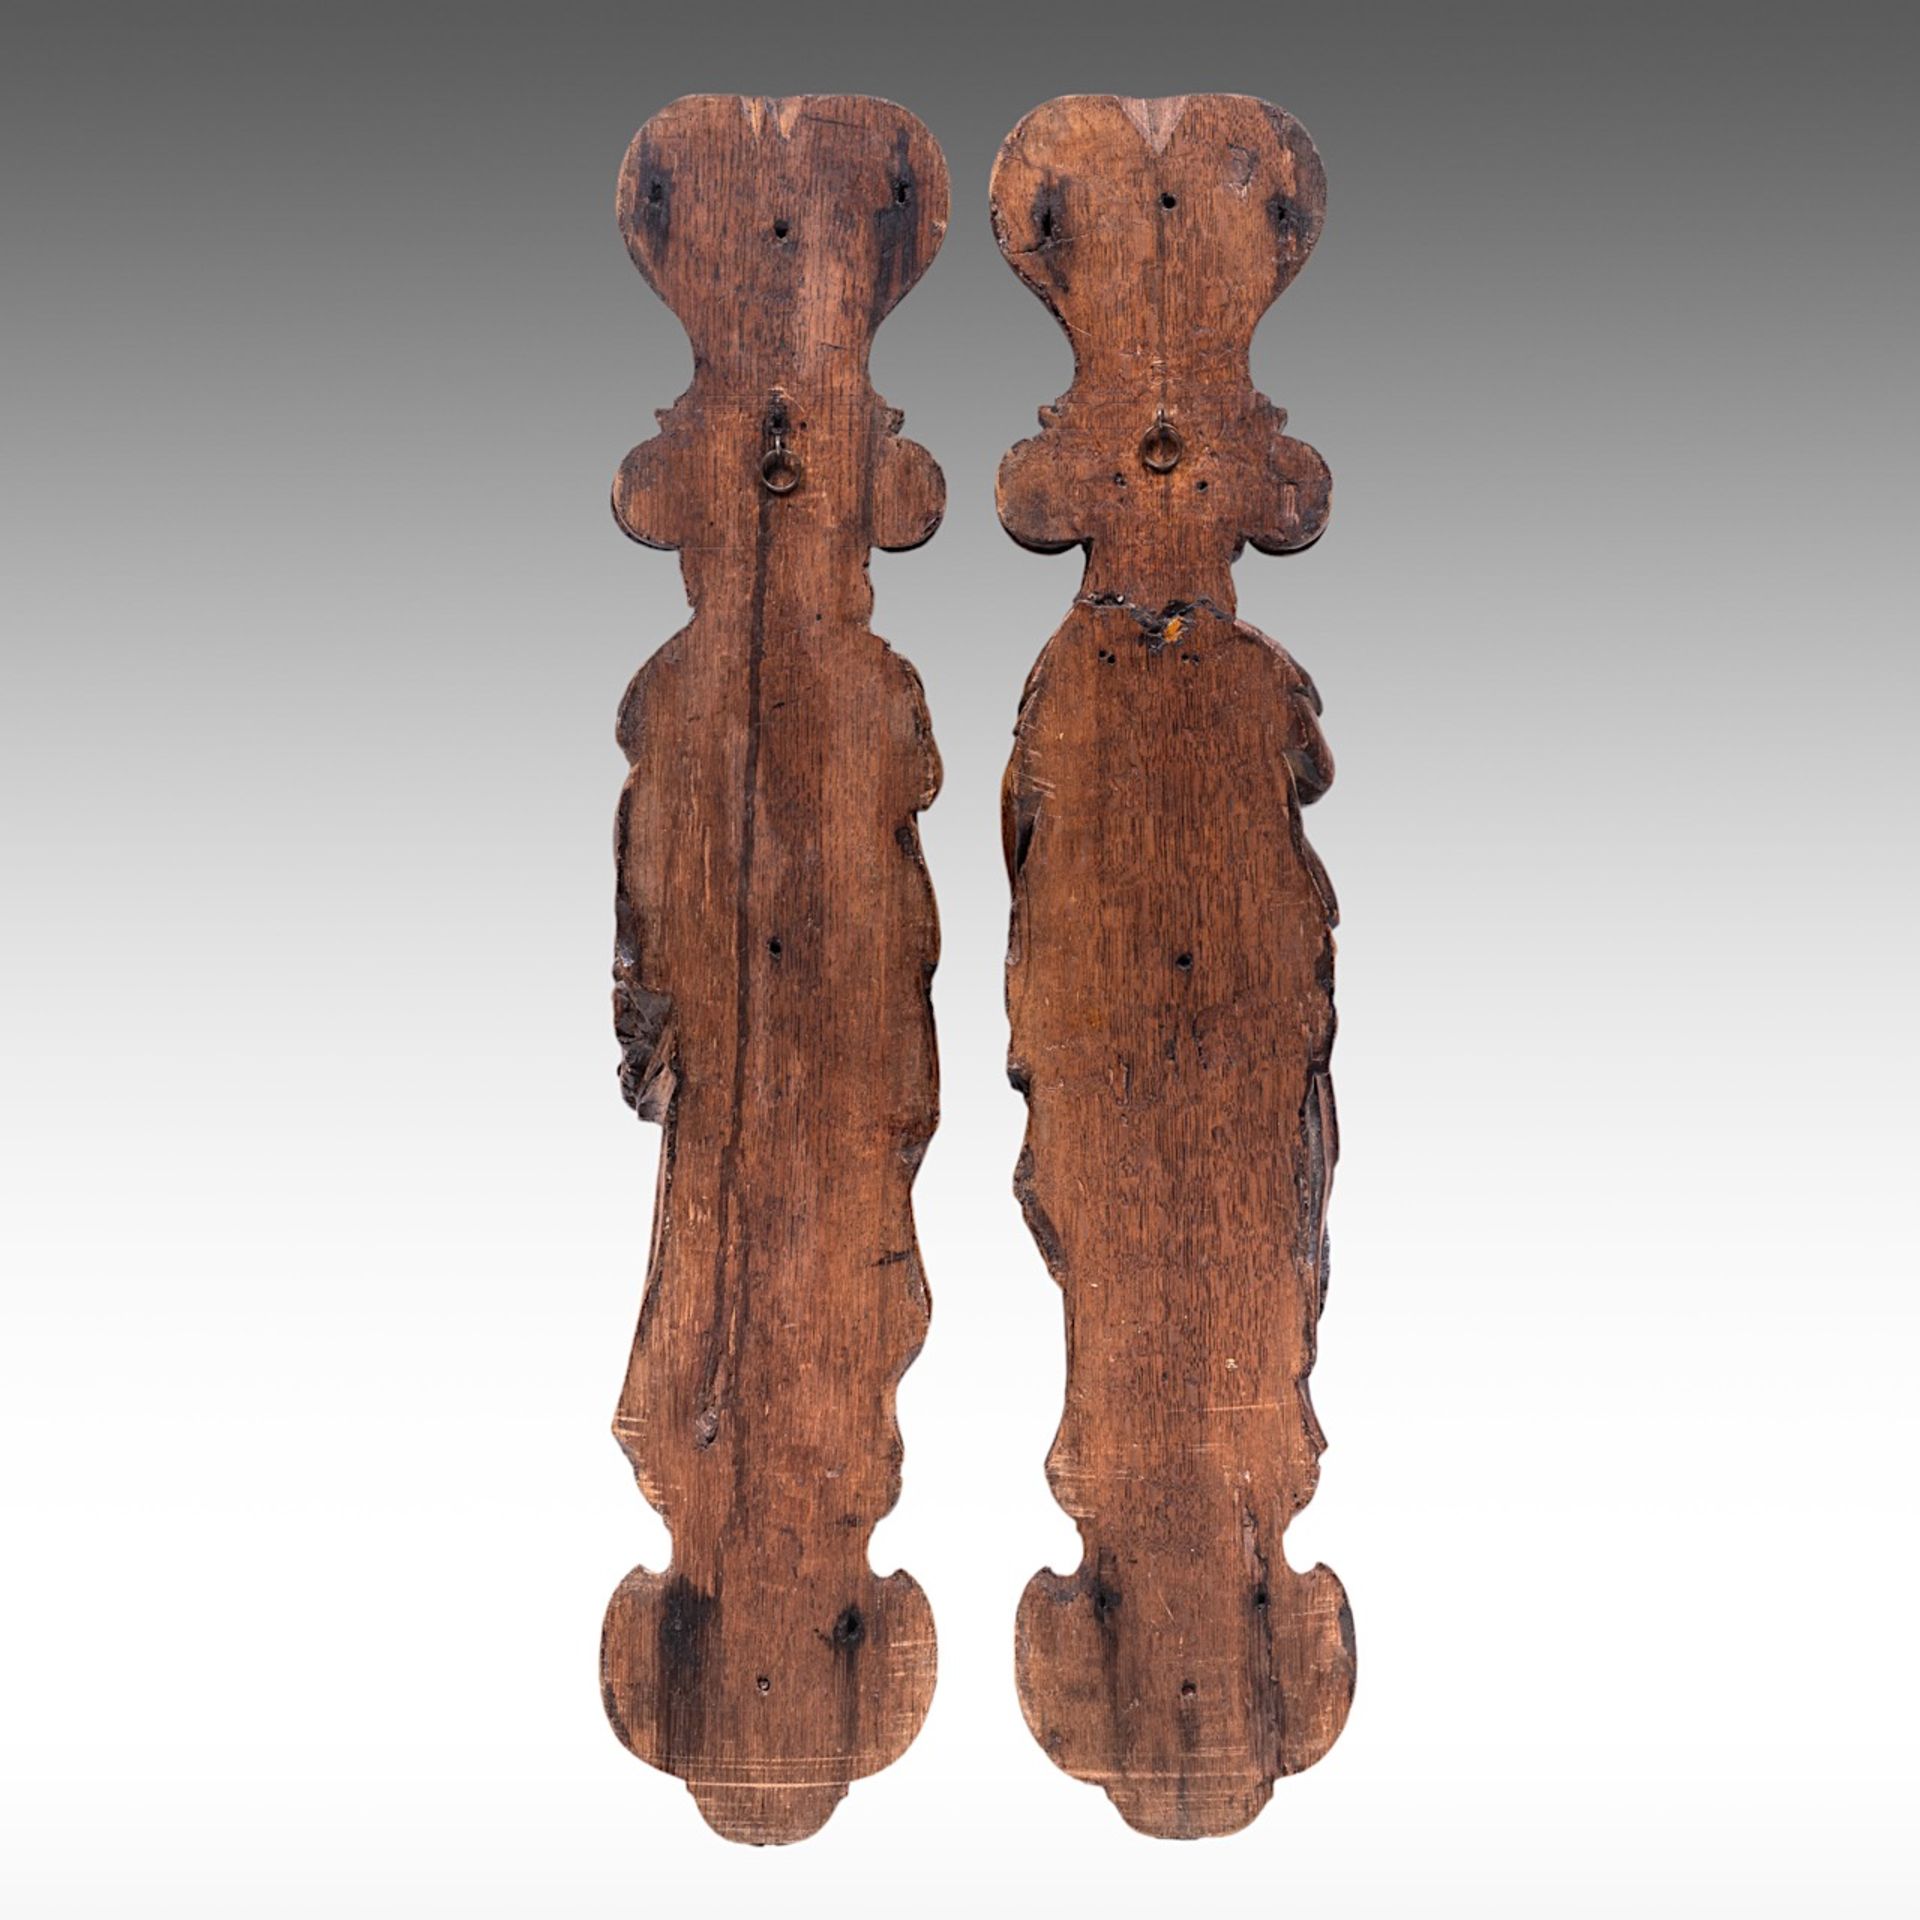 A pair of carved oak architectural ornaments of caryatids, 17thC, H 66 cm - Image 2 of 2